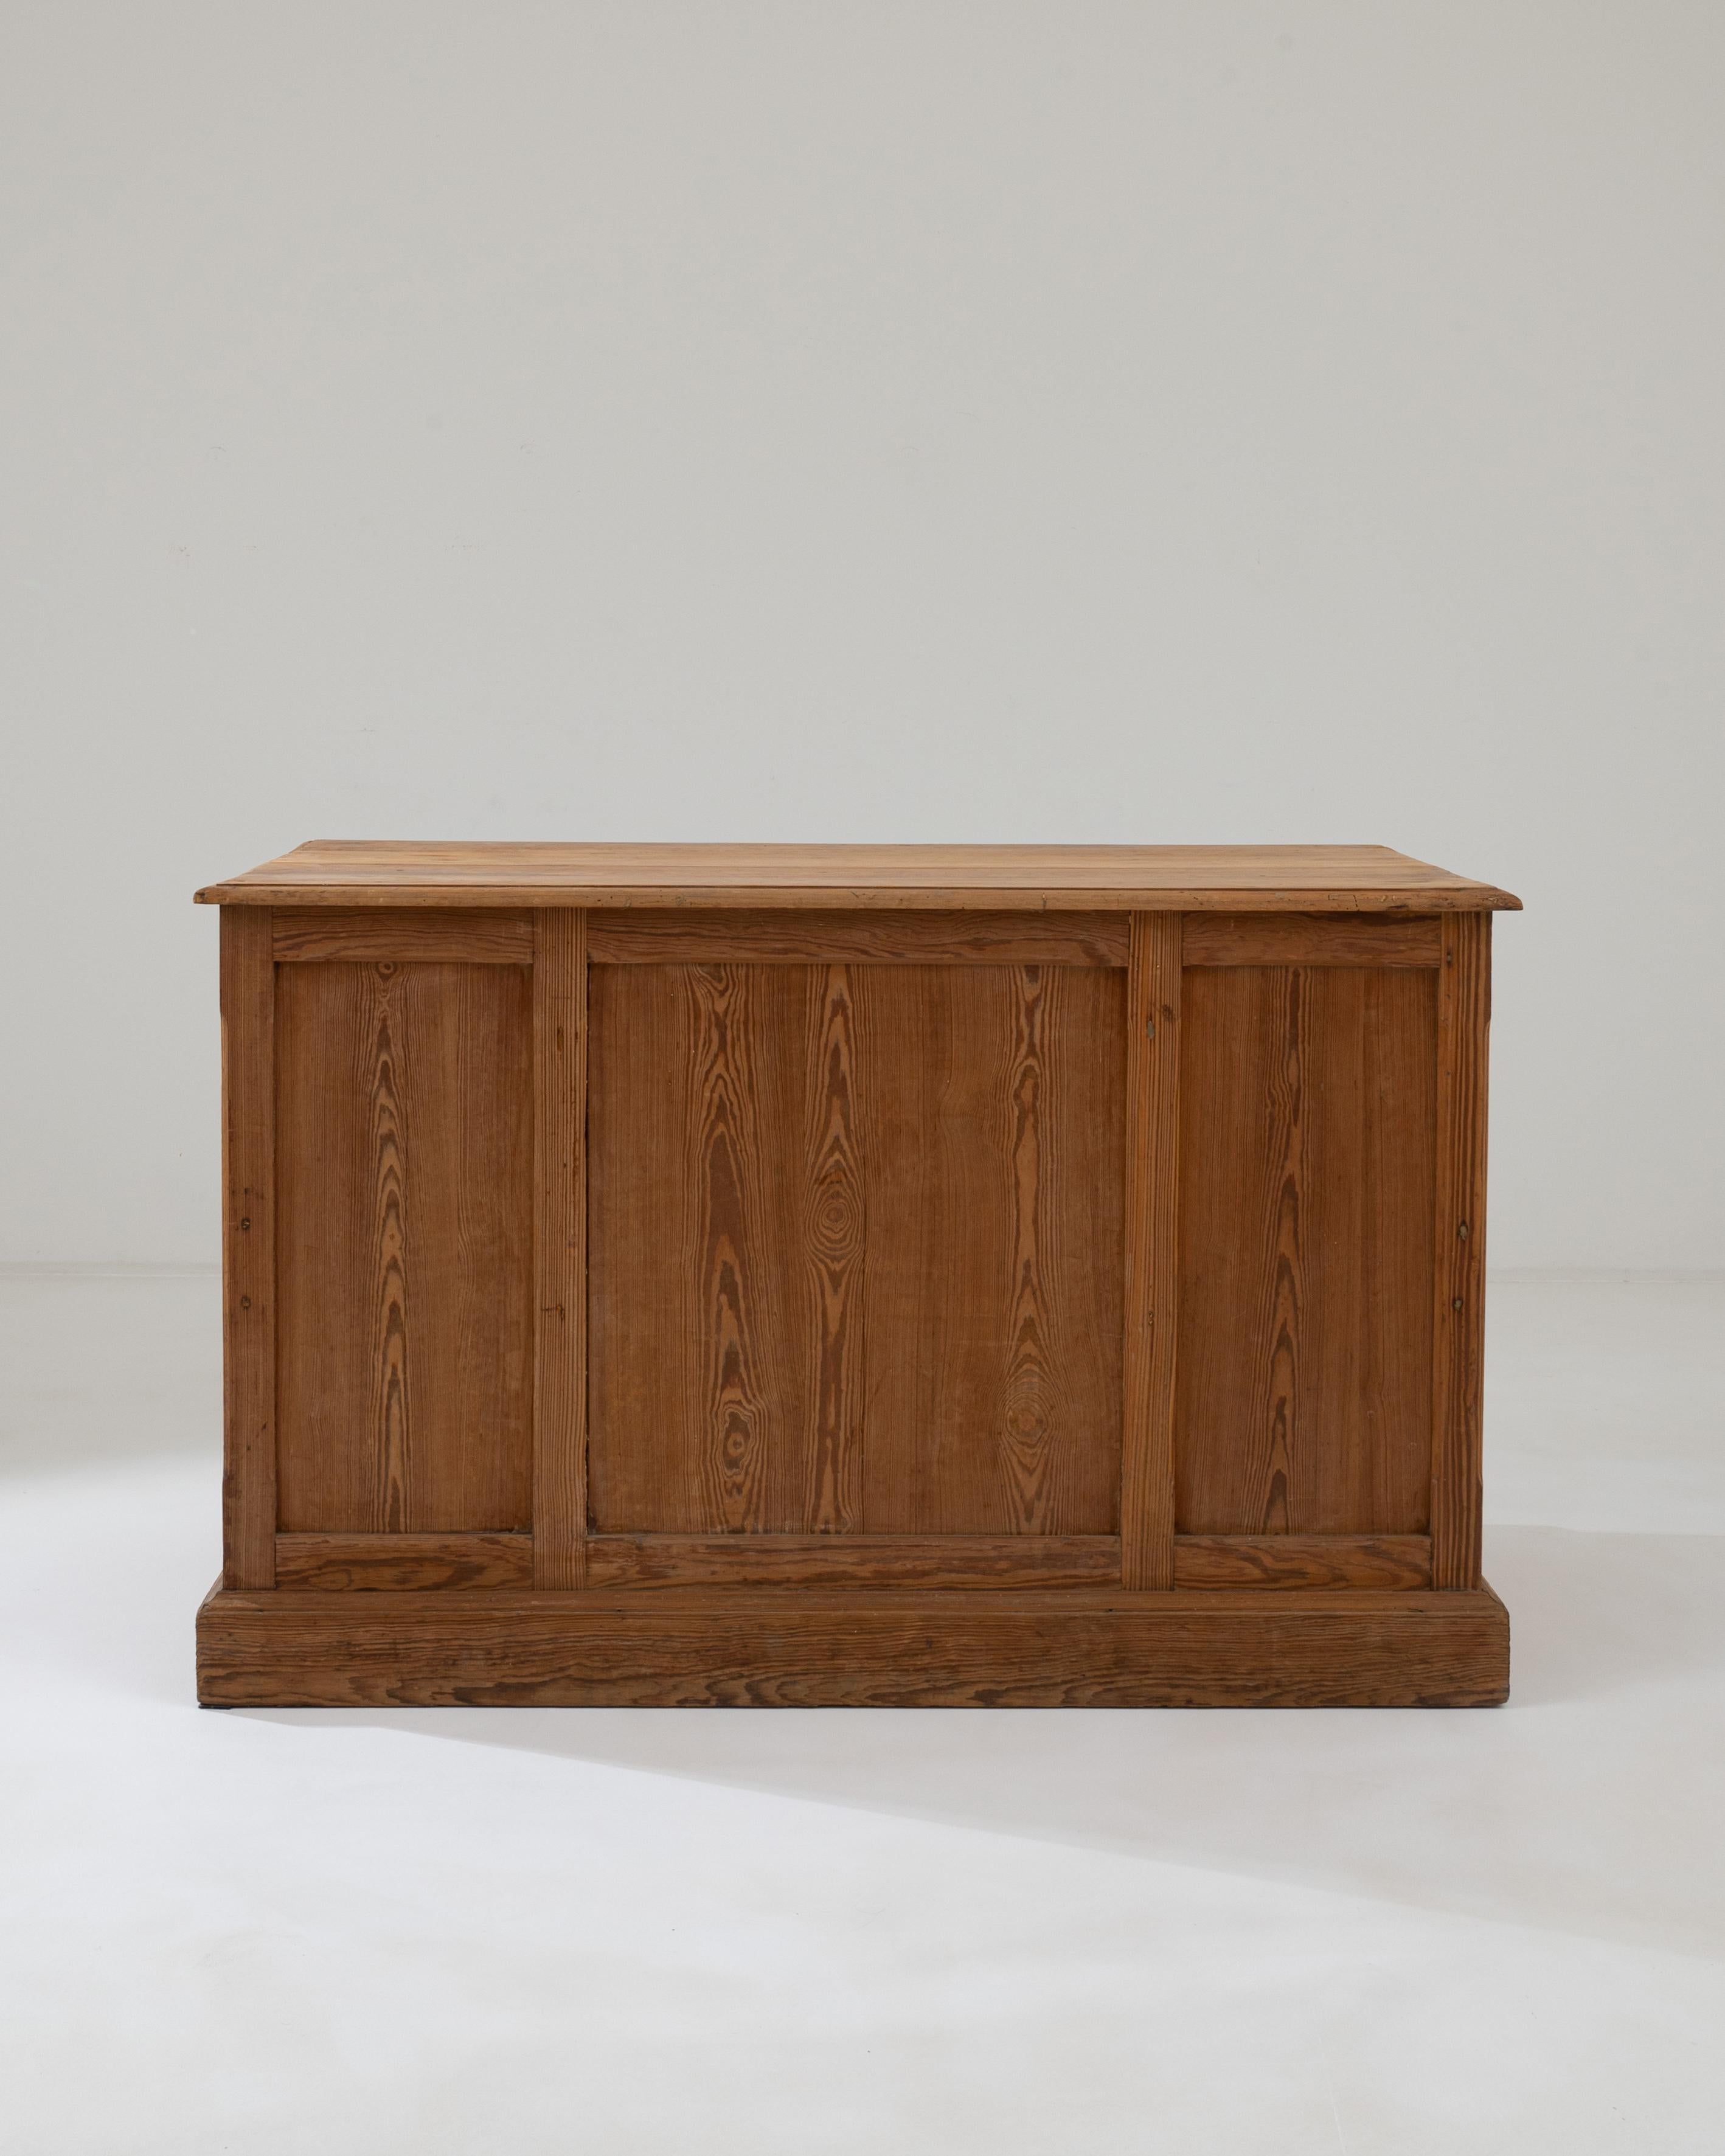 A wooden desk created in 1900s France. Unassuming and sturdily composed, this classic writing desk offers a calming sense of purpose and thoughtfully composed design. The seamlessly joined wood, which has been only lightly brushed by time, forms a